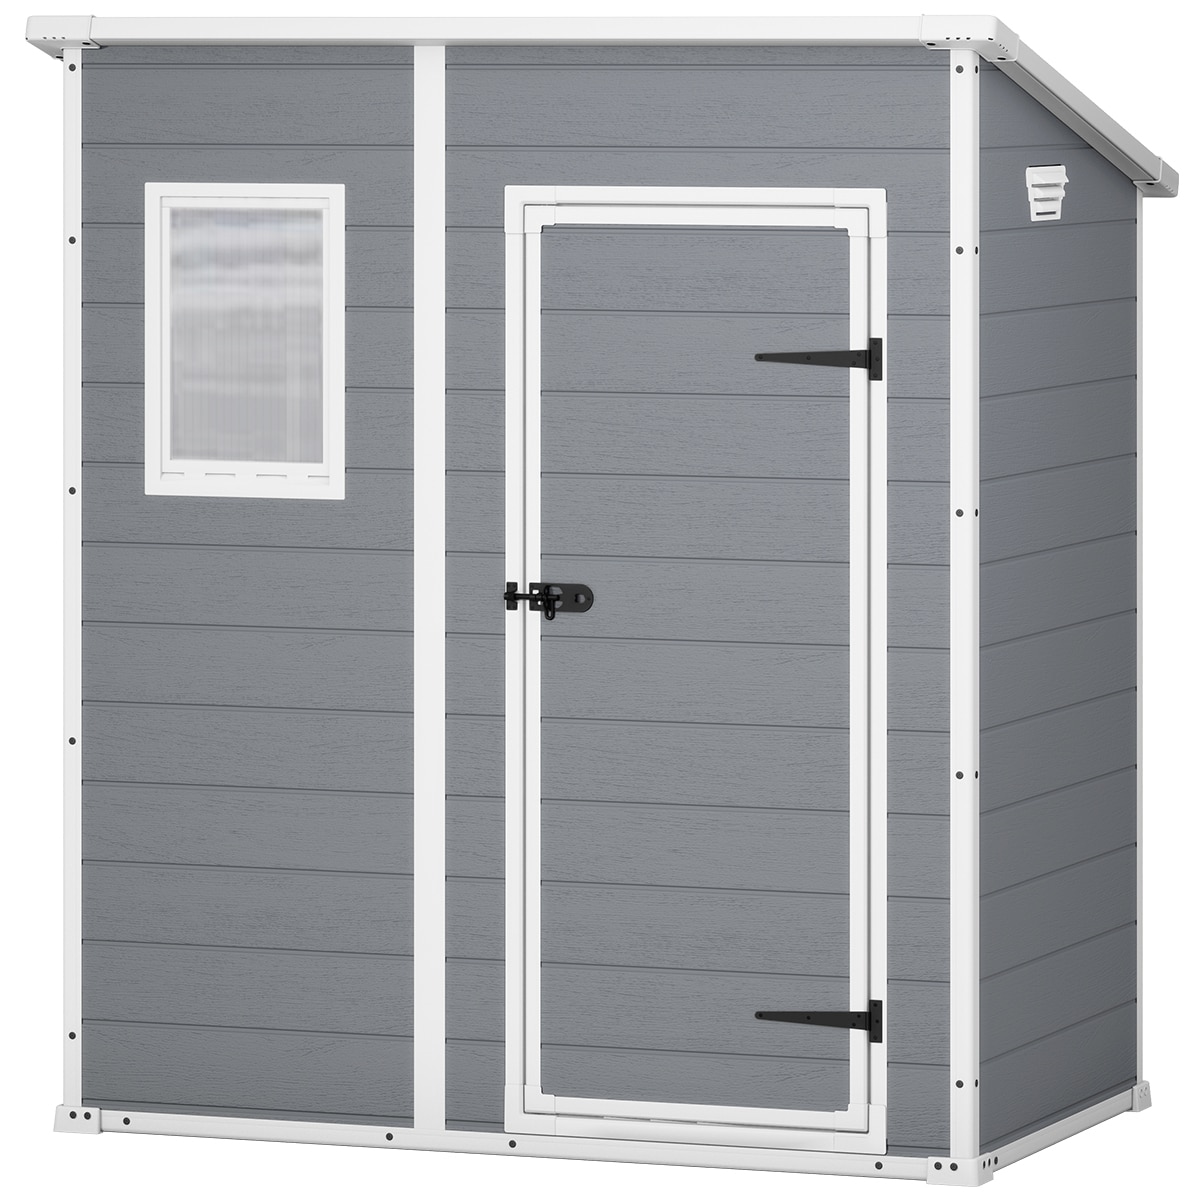 Manor Pent 6 x 4 Shed